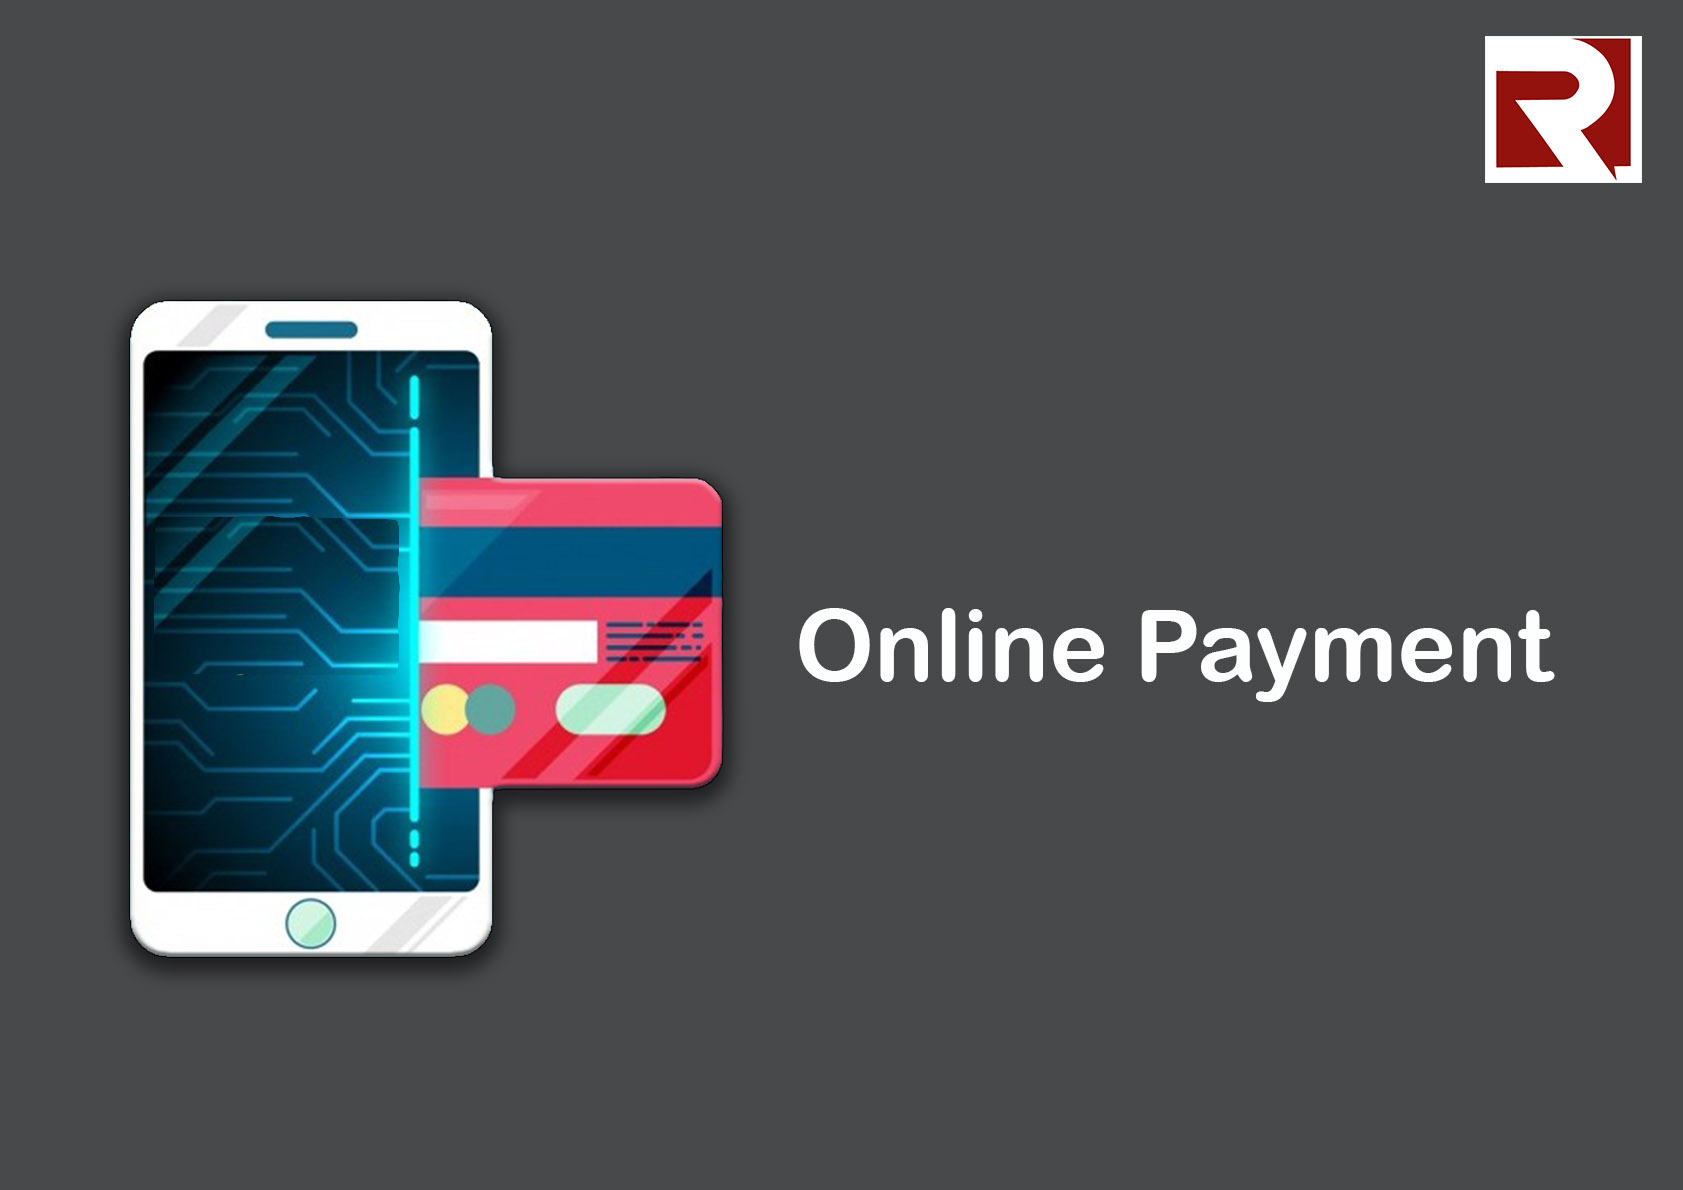 Online Payment Challenges: Why Should Businesses Care?